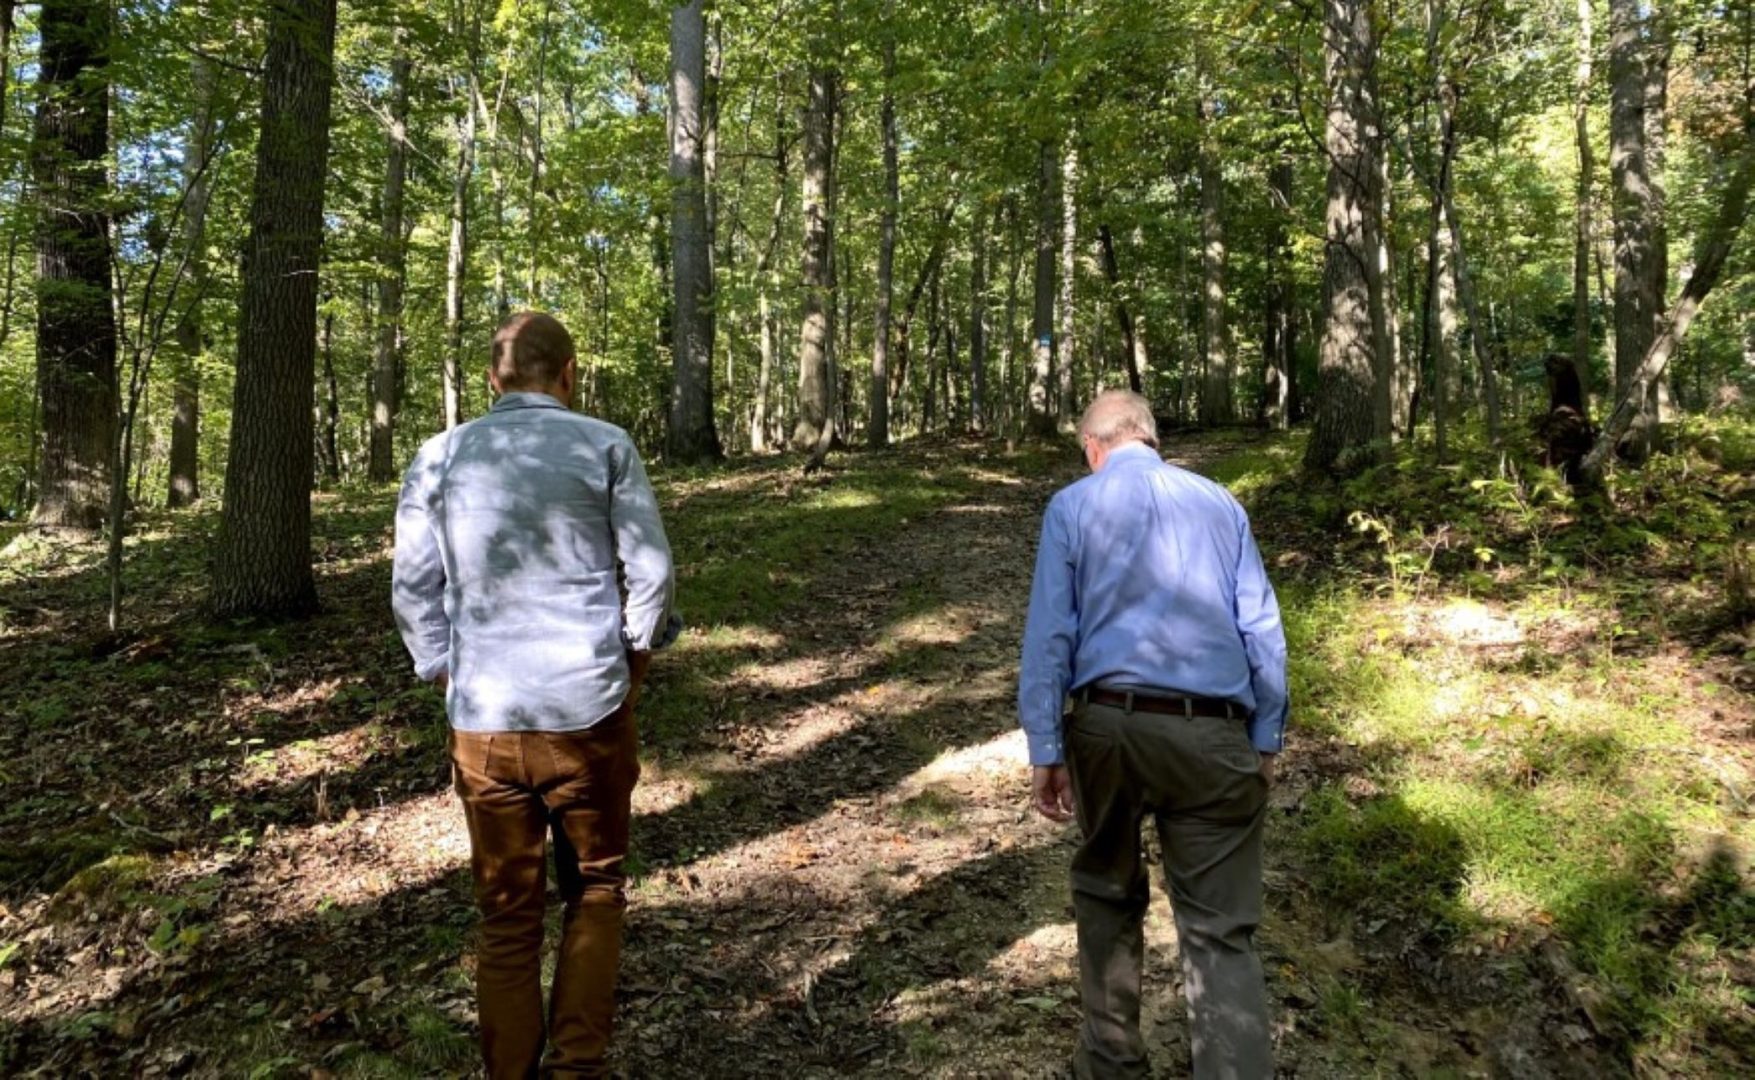 Researchers Ryan Utz, an assistant professor of water resources at Chatham University, and Walter Carson, an associate professor of plant community ecology at the University of Pittsburgh, walk through Eden Hall at Chatham University.